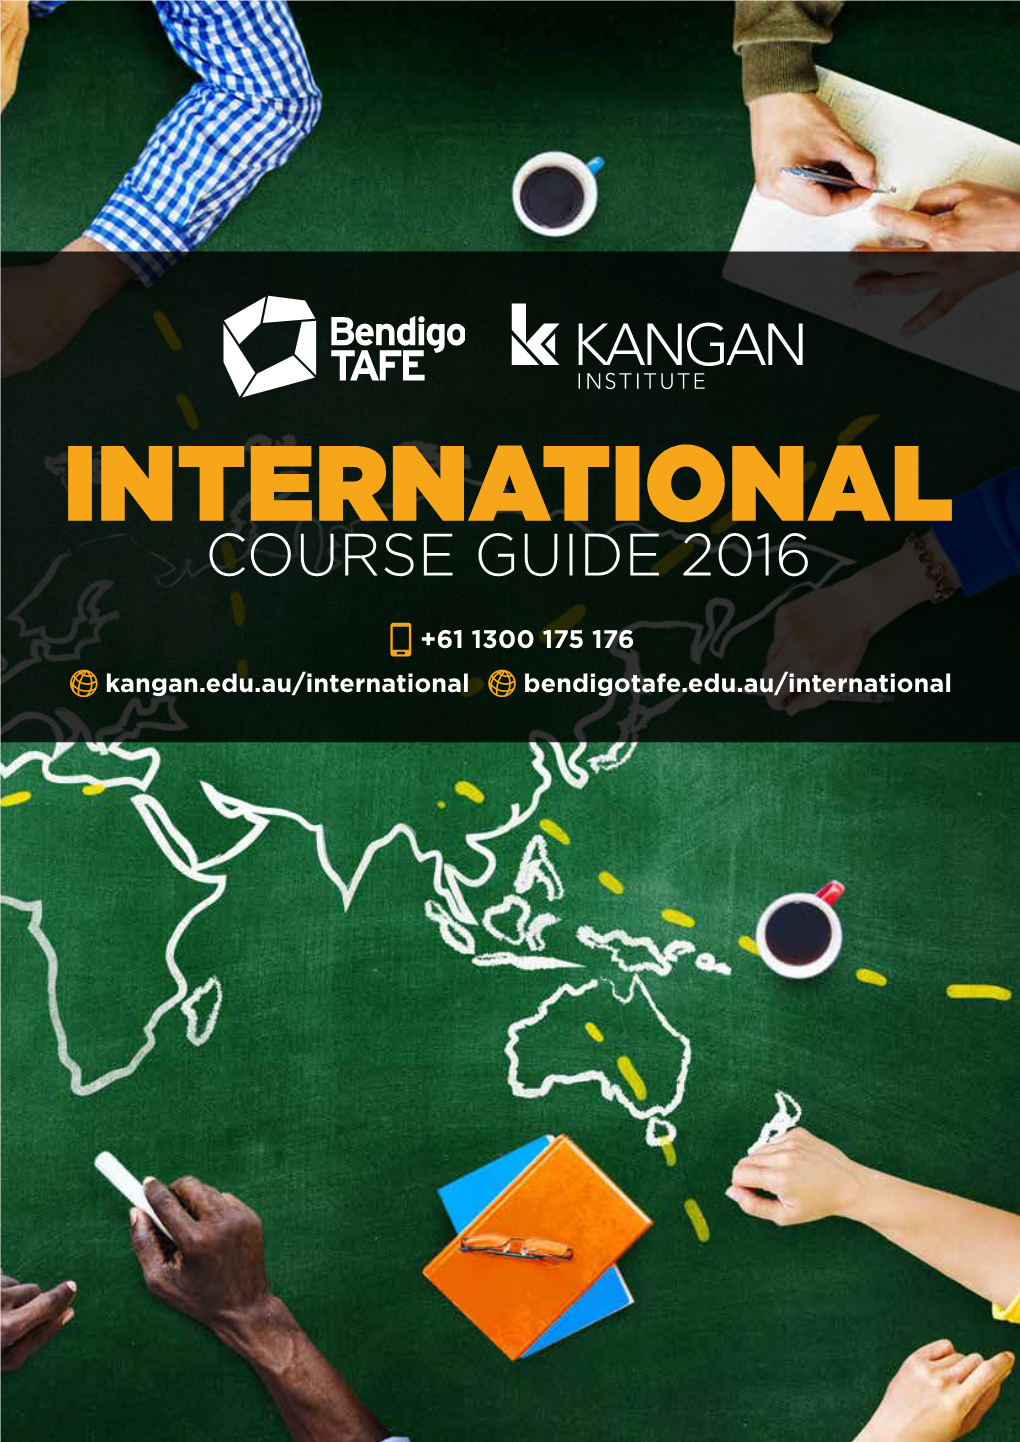 International Course Guide 2016